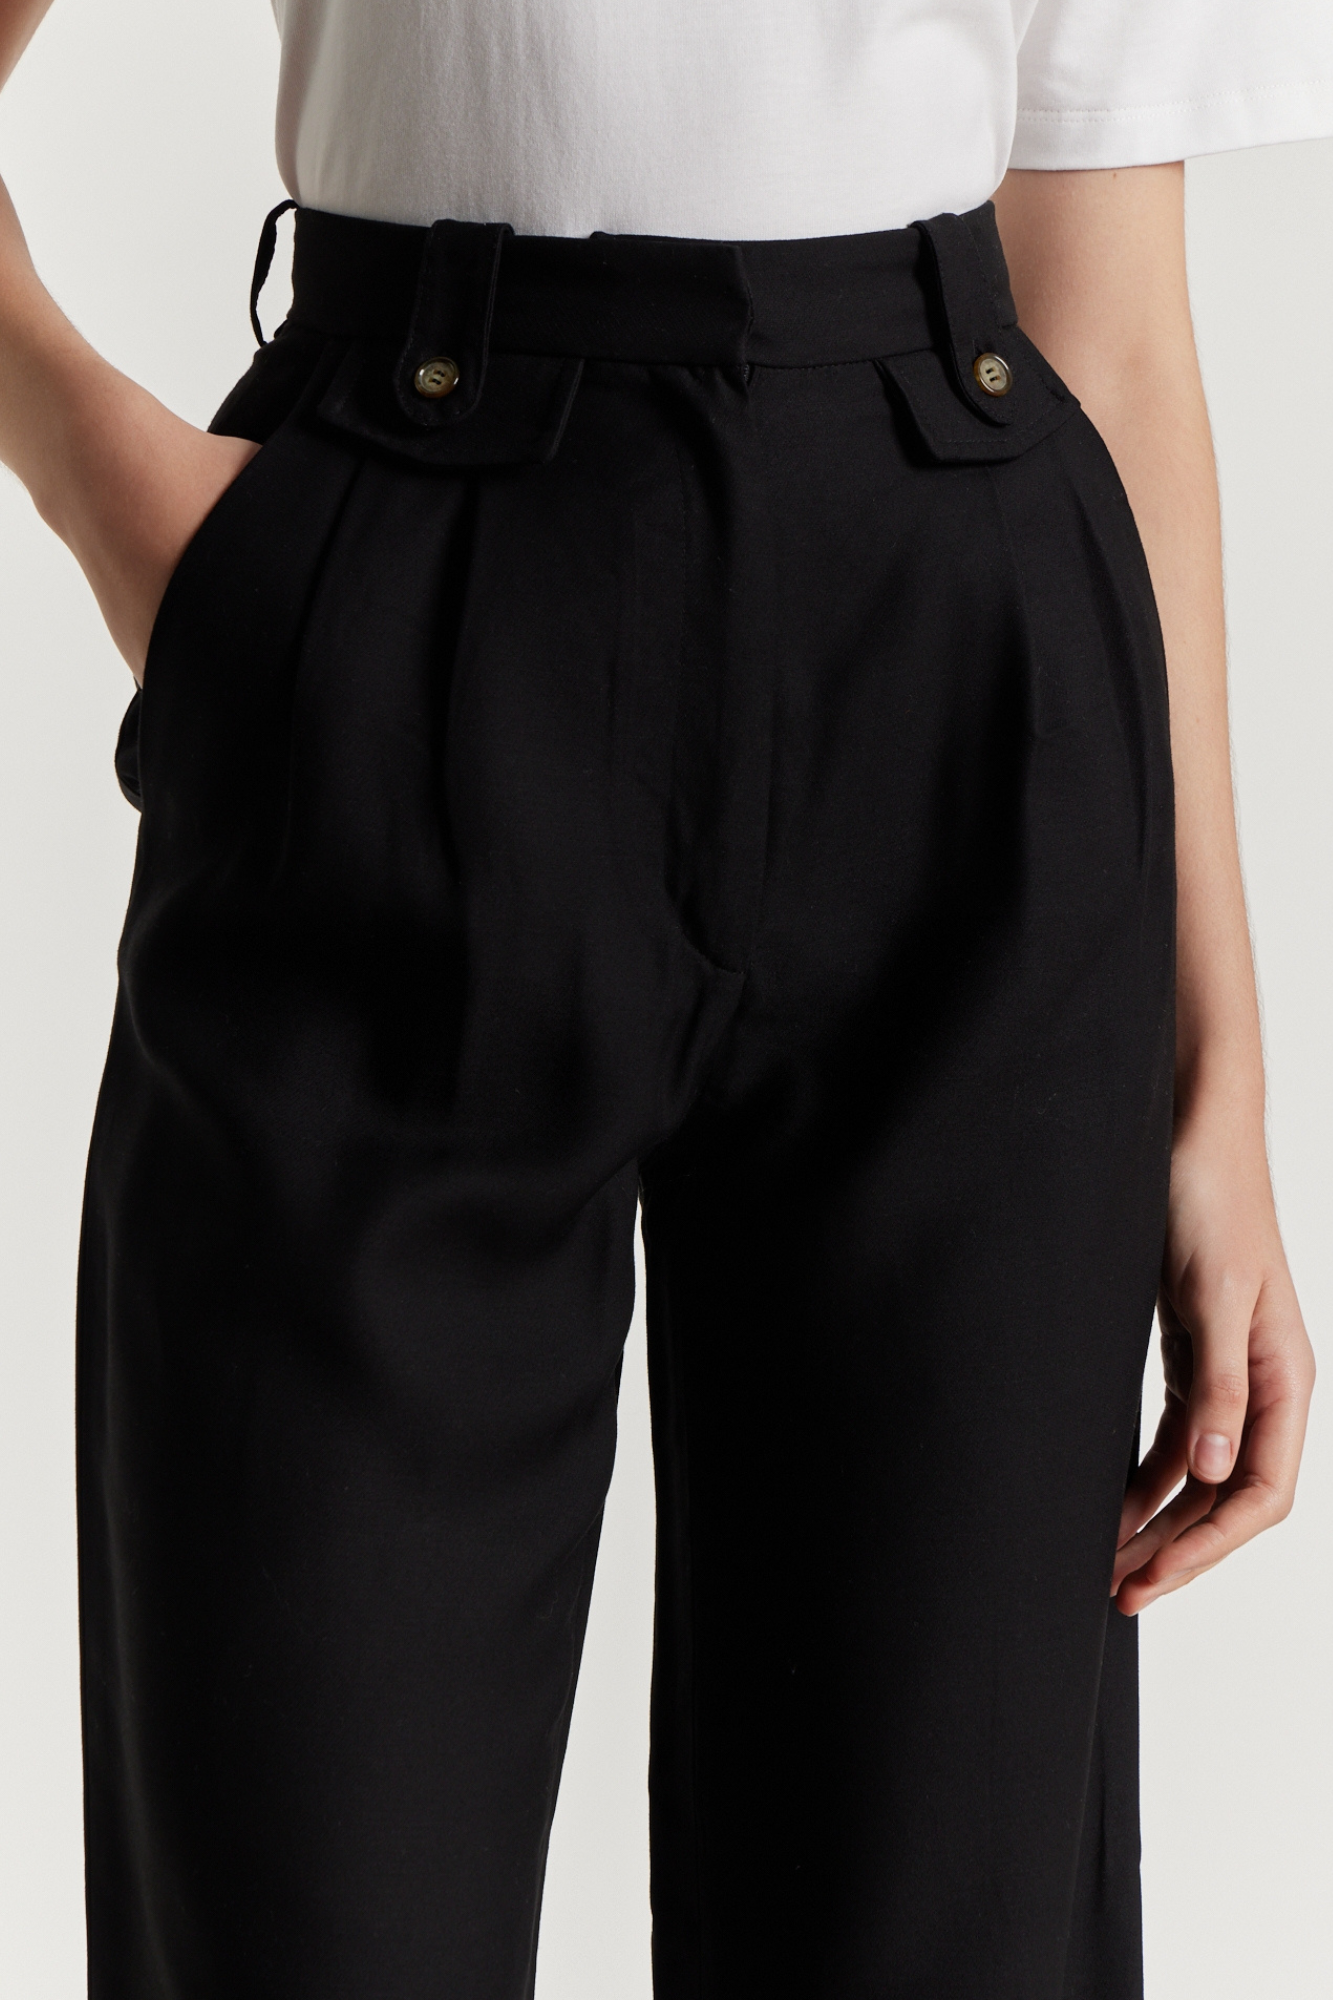 BLACK High-Waisted Trousers